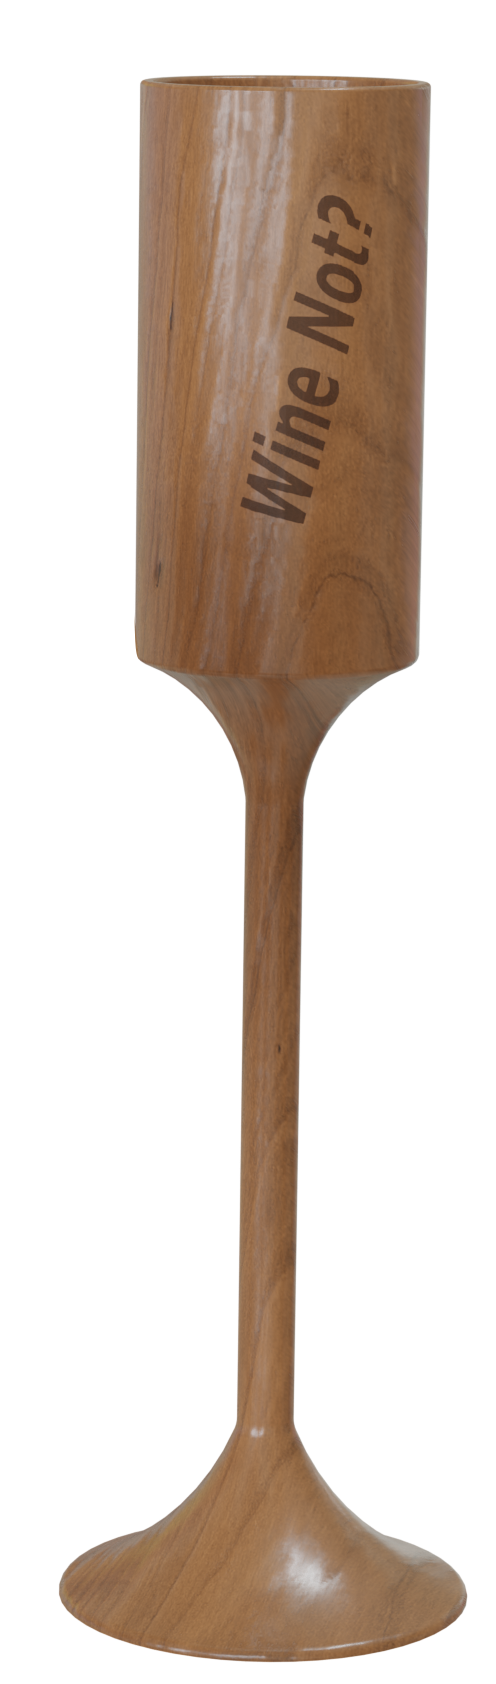 Cherry-wood-cup-engraved-tall